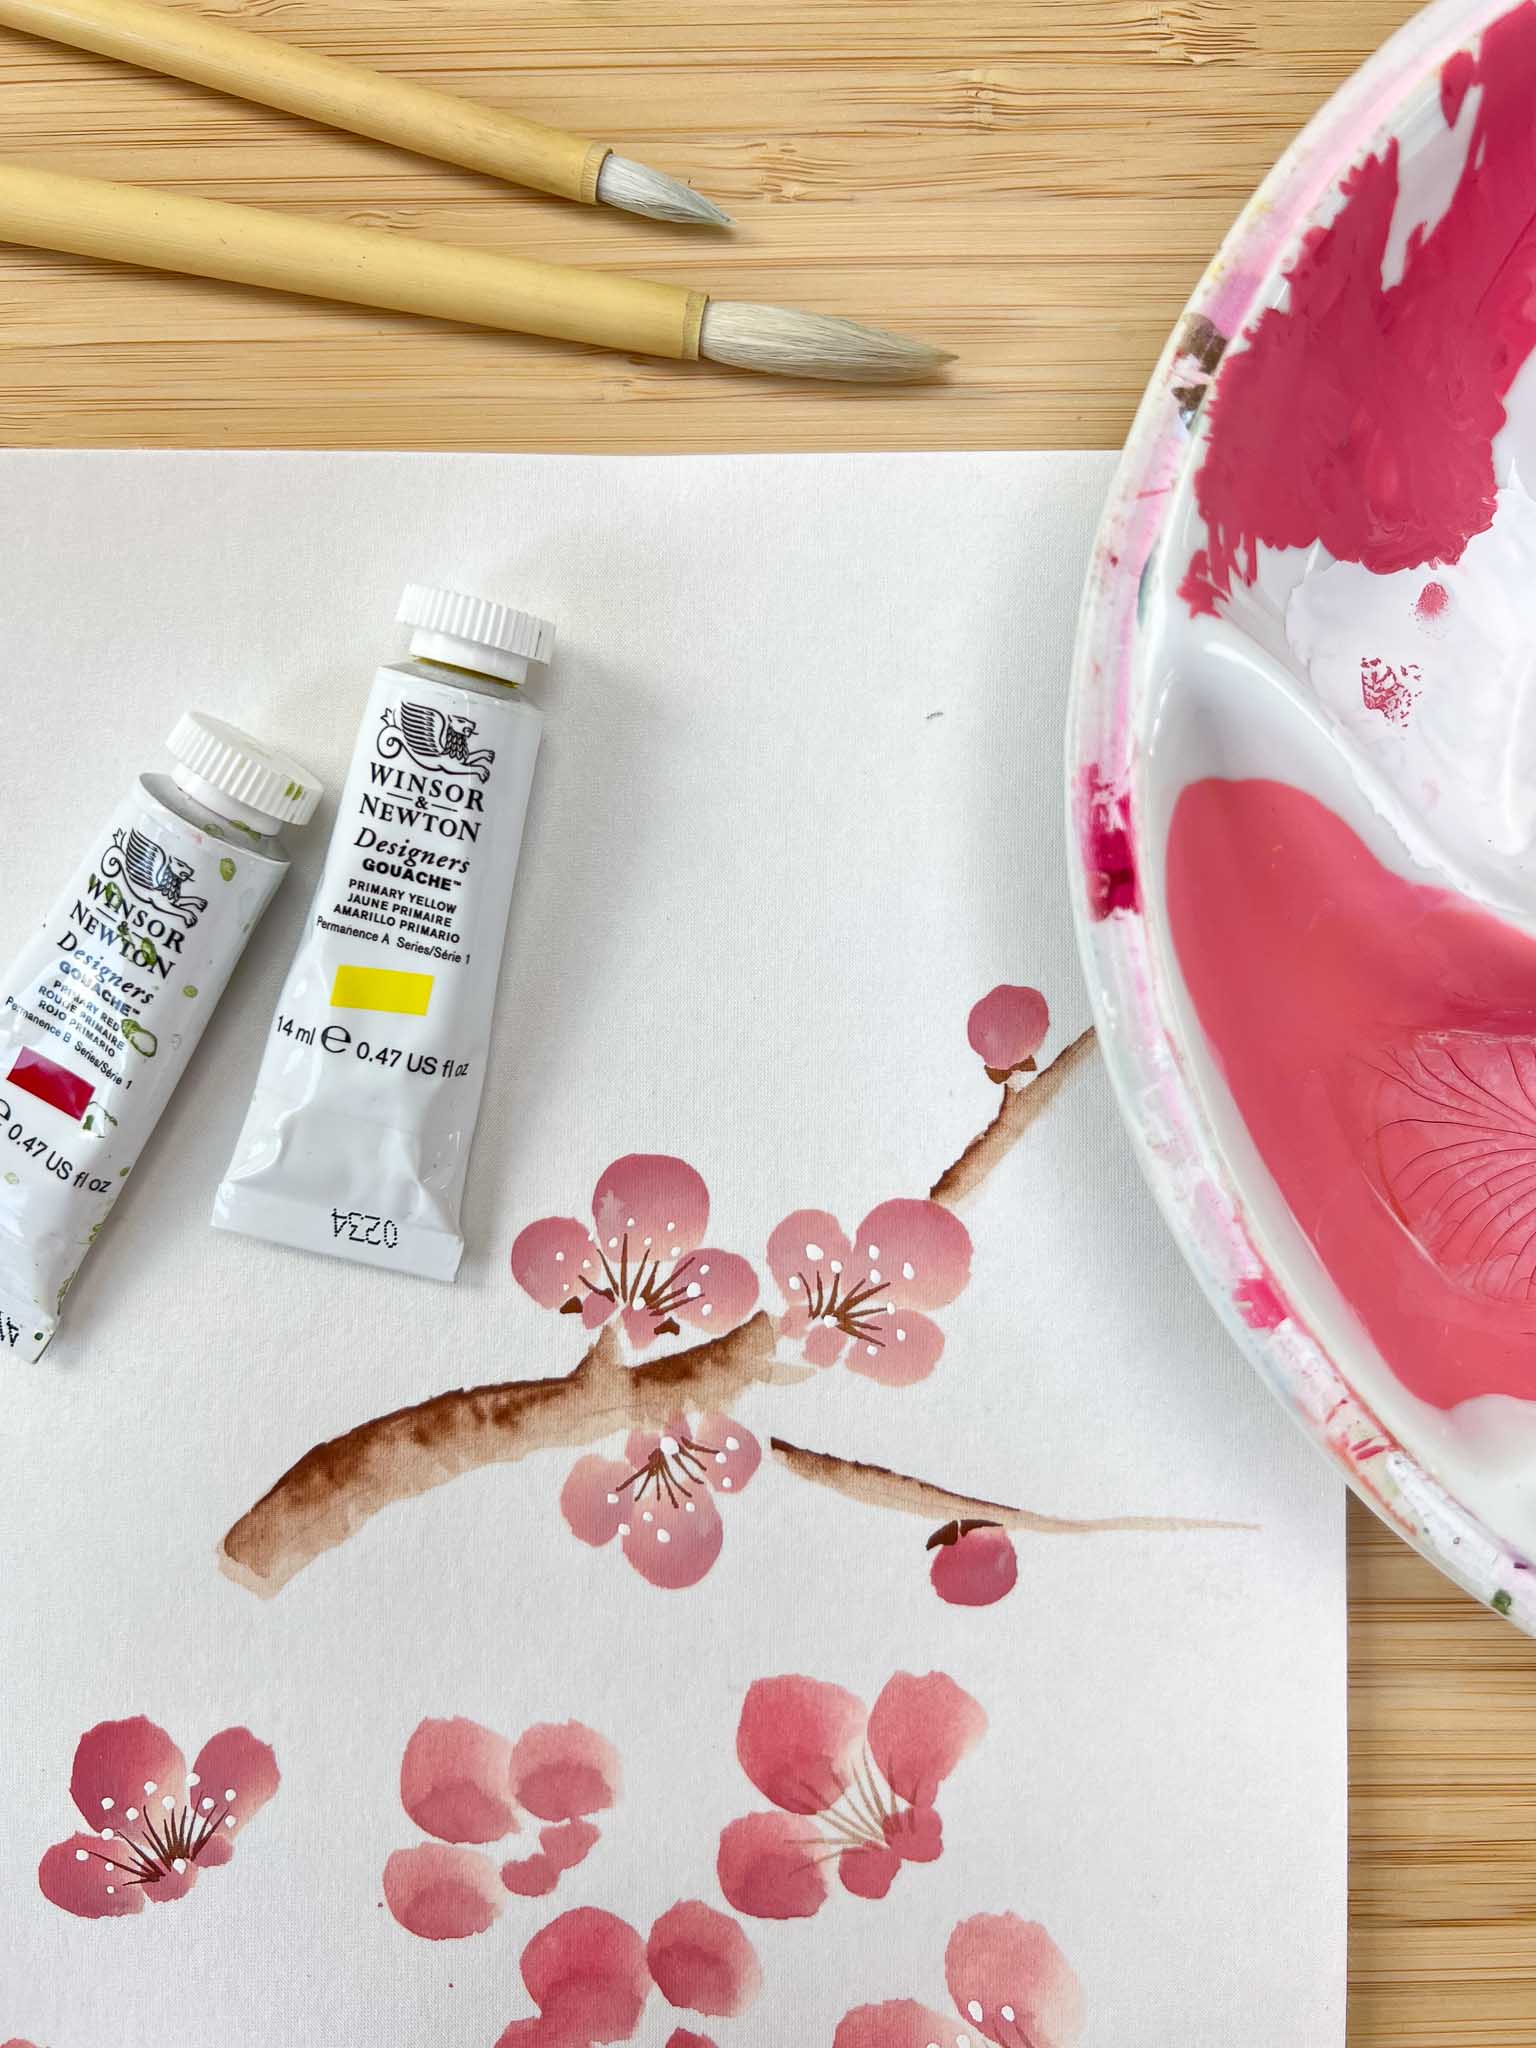 paintbrushes, paints, and a palette next to a painting of pink blossom flowers on silk paper